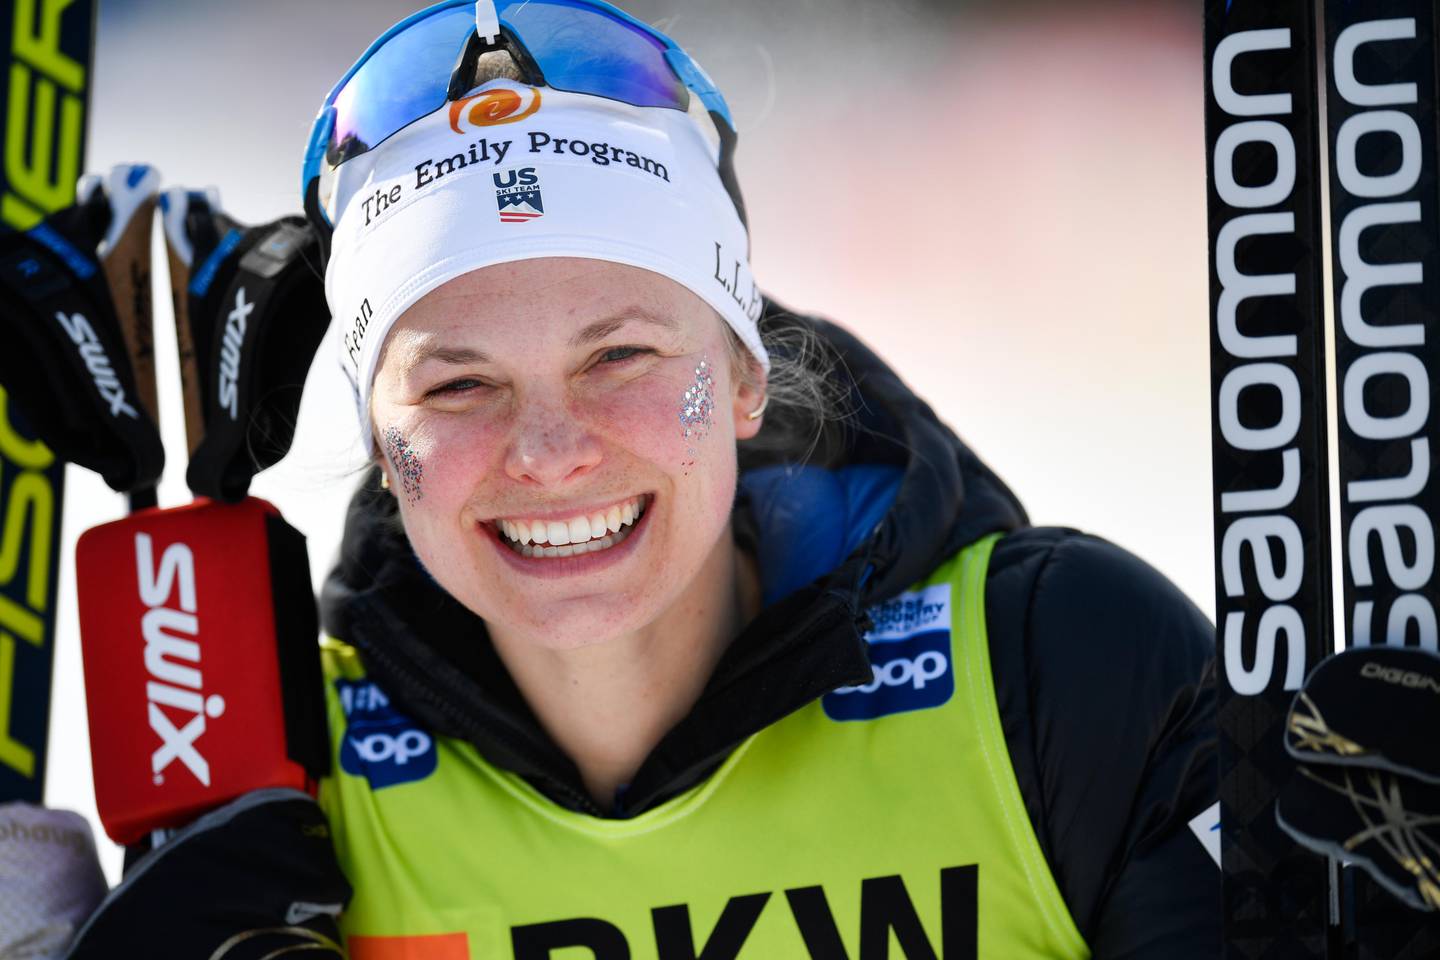 Jessica Diggins of the USA smiles after the women's 10km free style race at the Davos Nordic FIS Cross Country World Cup in Davos, Switzerland, Sunday, Dec. 15, 2019. (Gian Ehrenzeller/Keystone via AP)